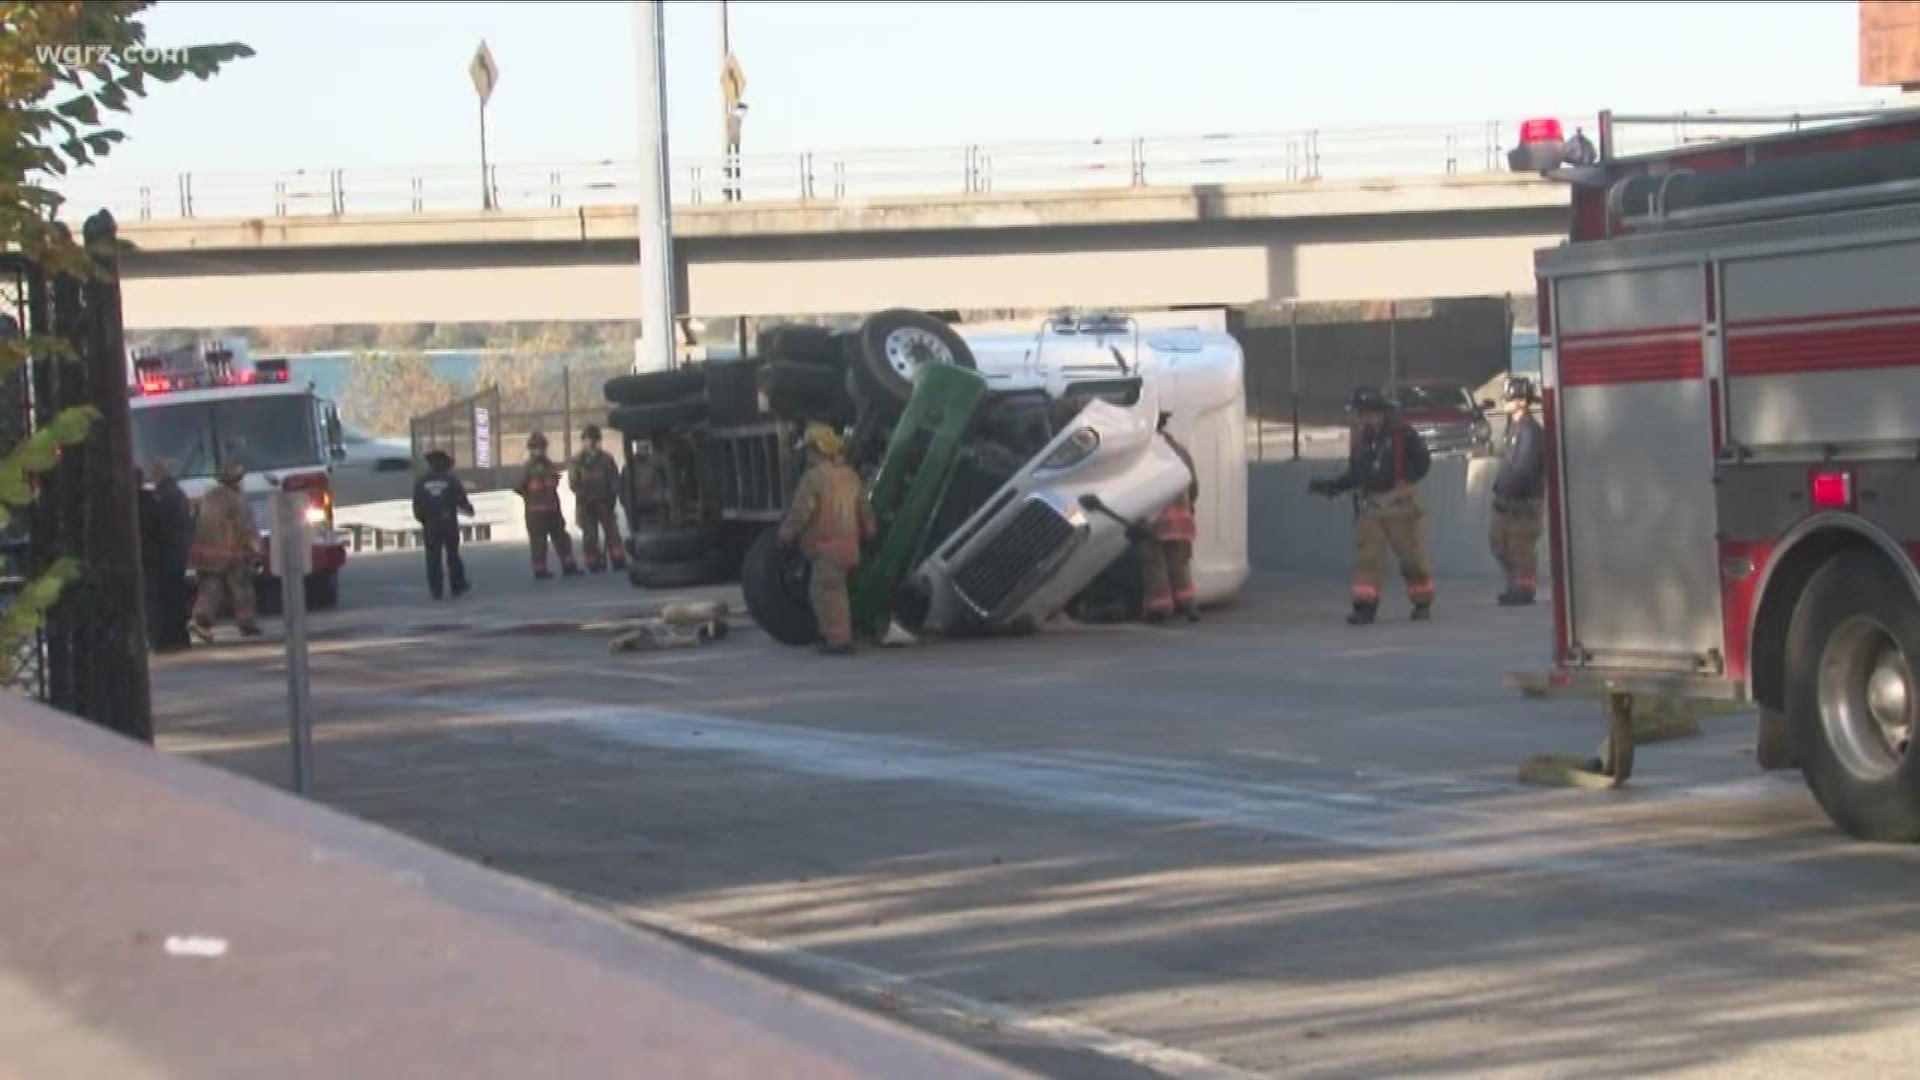 A TRUCK OVERTURNED ON THE RAMP.
RIGHT NOW -- TRAFFIC IS BEING RE-ROUTED TO THE BUSTI AVENUE ENTRANCE TO THE PEACE BRIDGE.